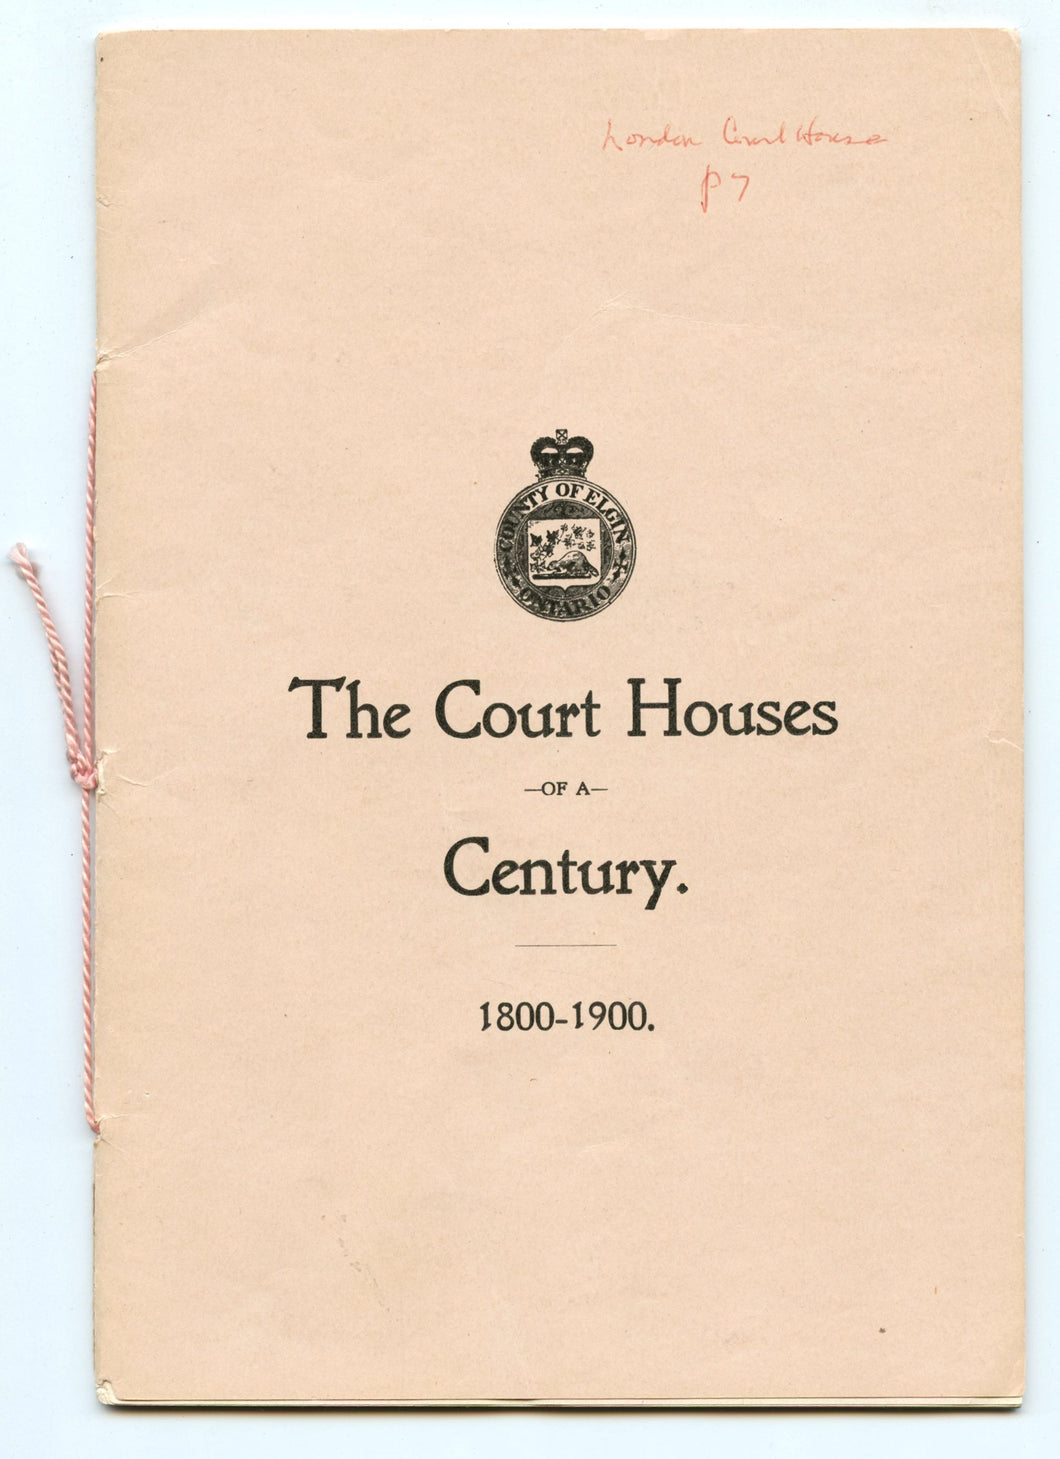 The Court Houses of a Century. 1800-1900.